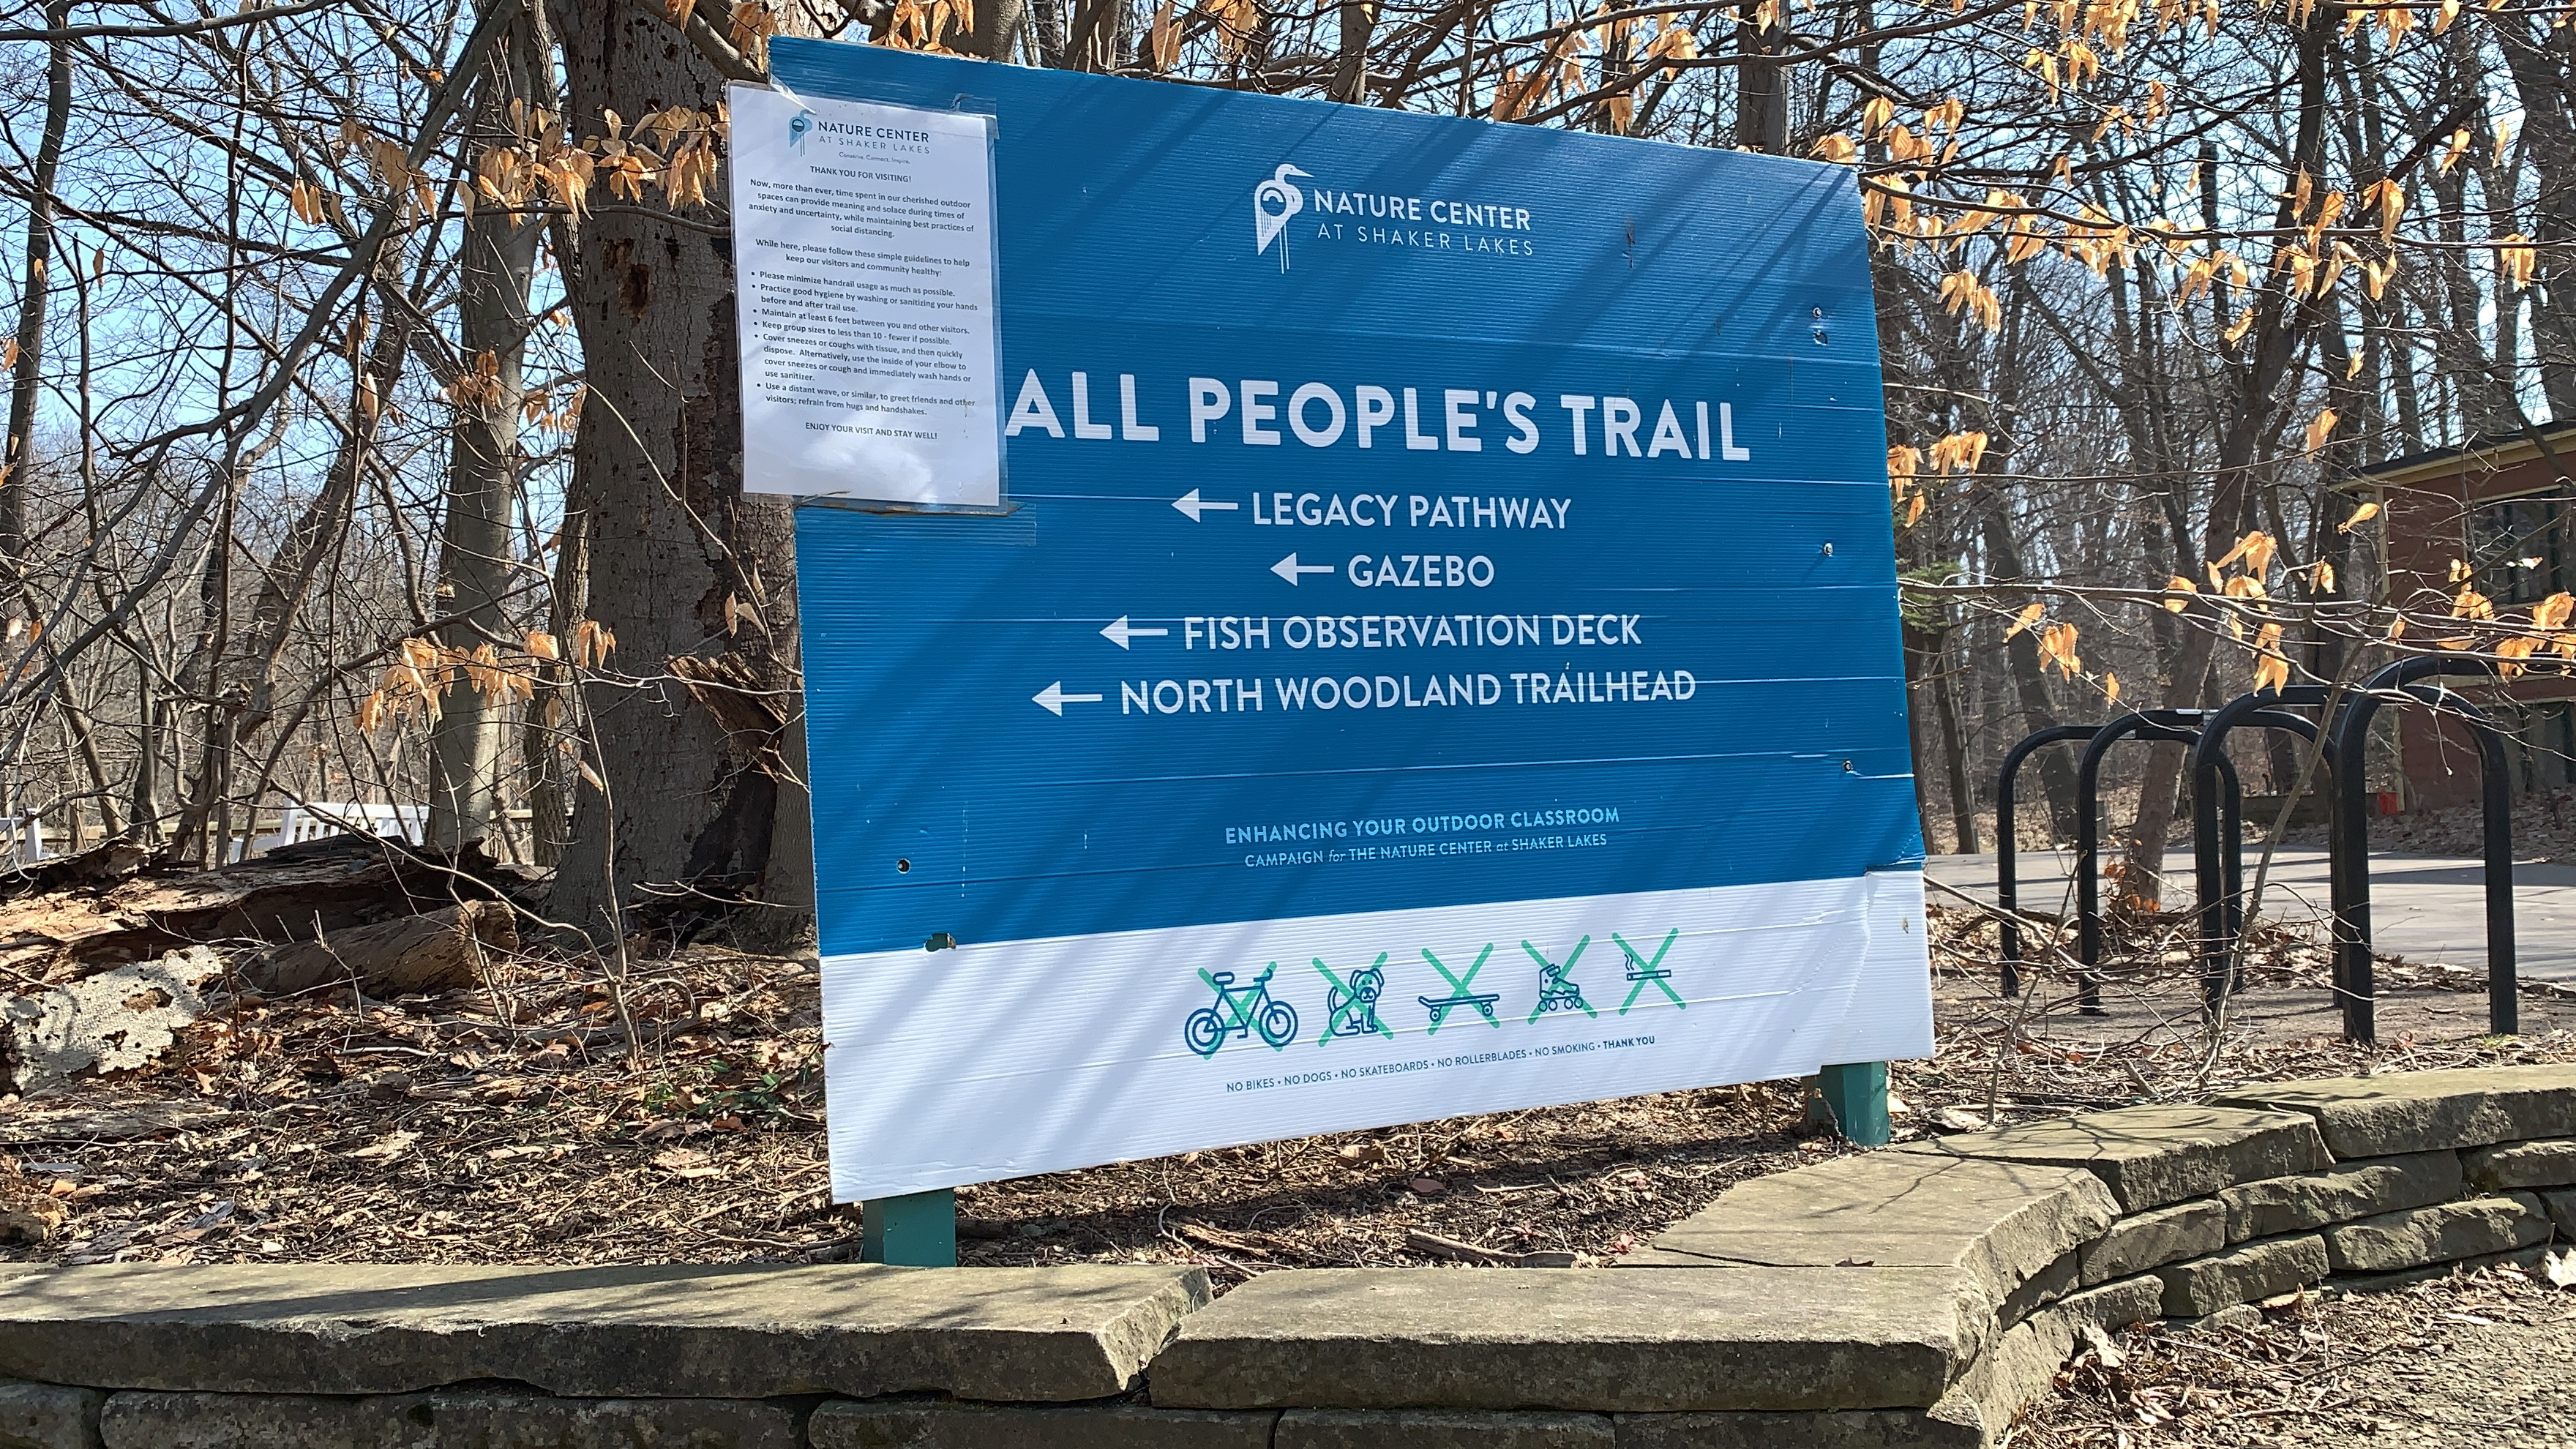 All People's Trail Making Nature Accessible to All